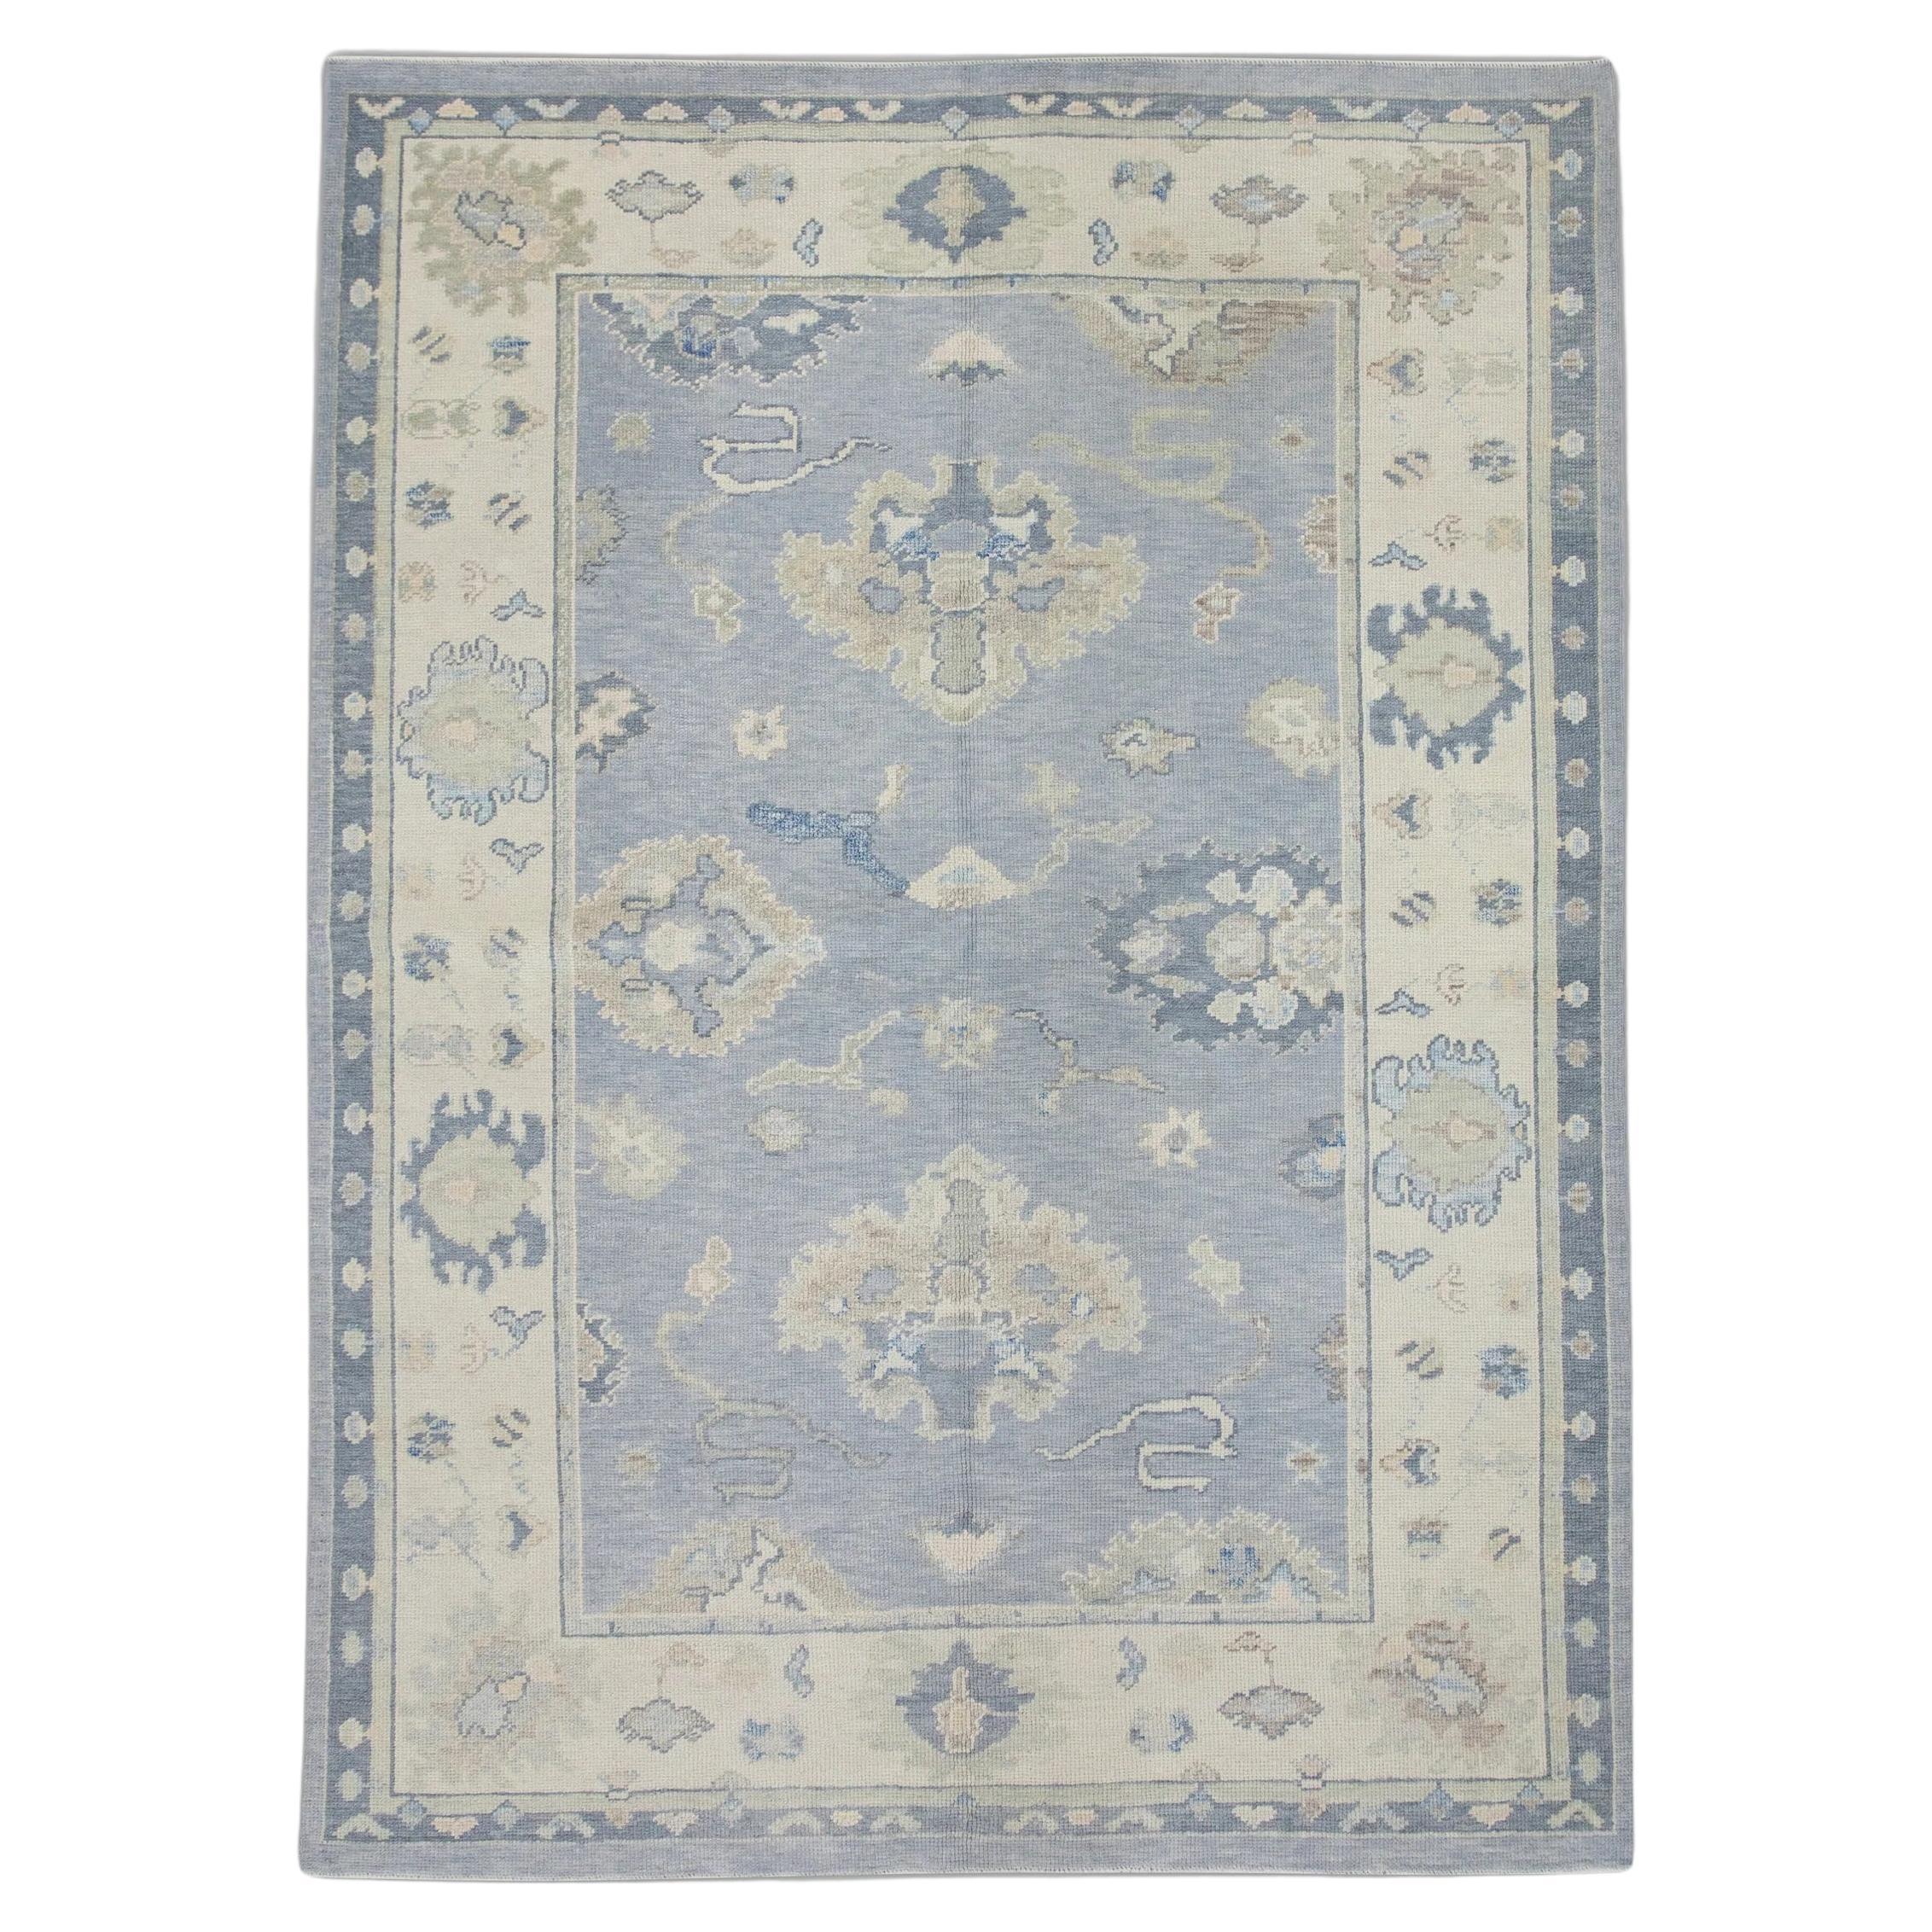 Handwoven Wool Floral Design Turkish Oushak Rug in Periwinkle Blue 5'11" x 7'10"